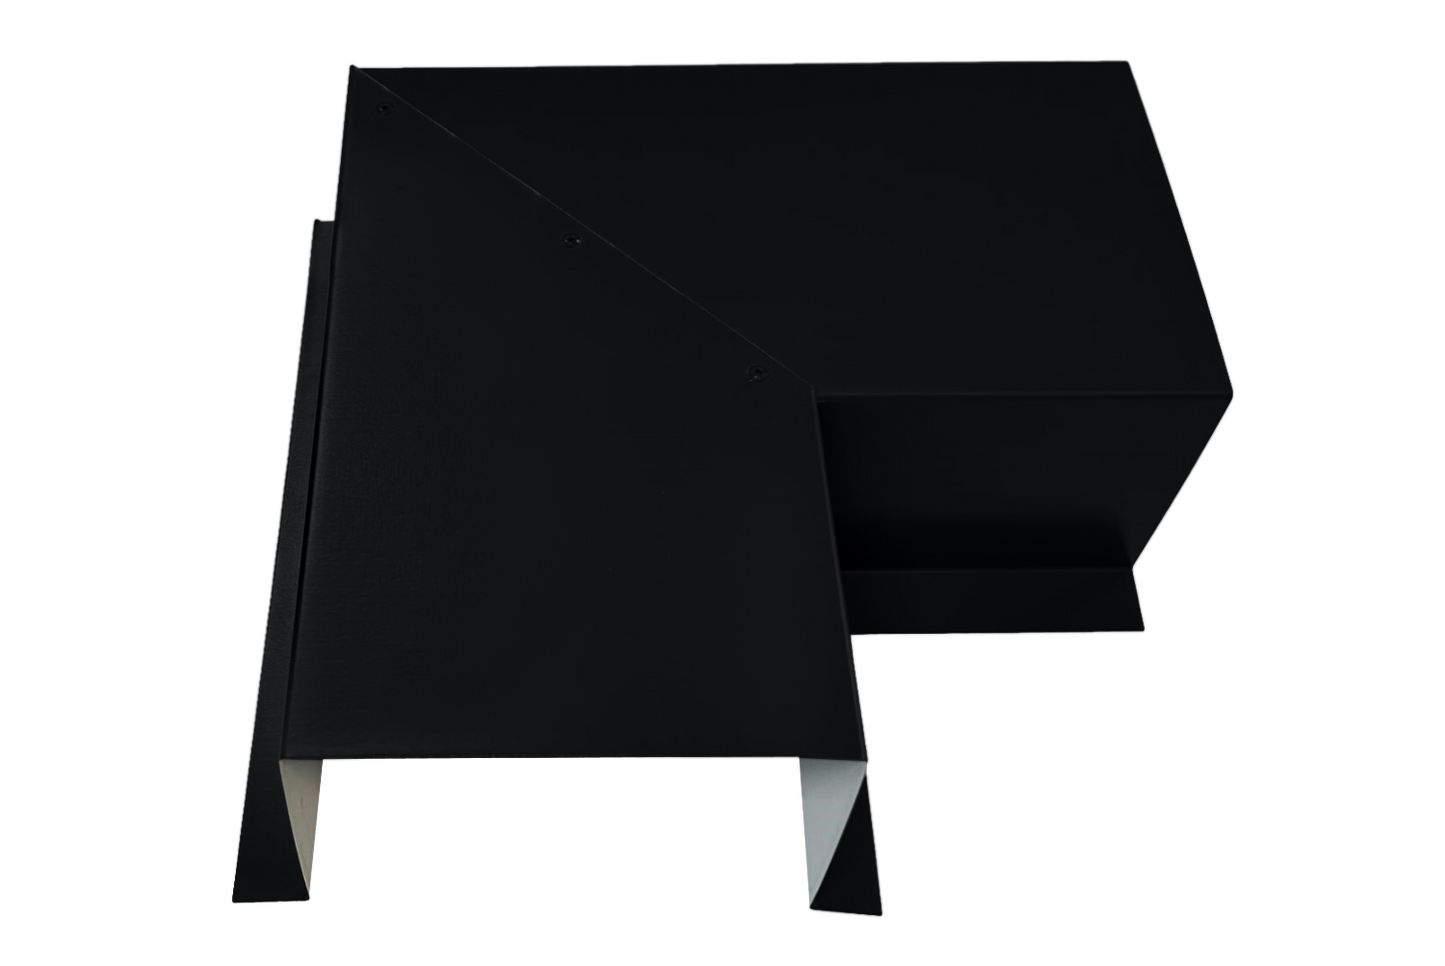 A minimalist, black, geometric-shaped metal structure viewed from an angled top perspective. Constructed from premium quality 24 gauge steel, the design features intersecting lines and angled surfaces, creating a modern, abstract appearance. This is the Commercial Series - 24 Gauge Line Set Cover Side Turning Elbows - Premium Quality by Perma Cover.